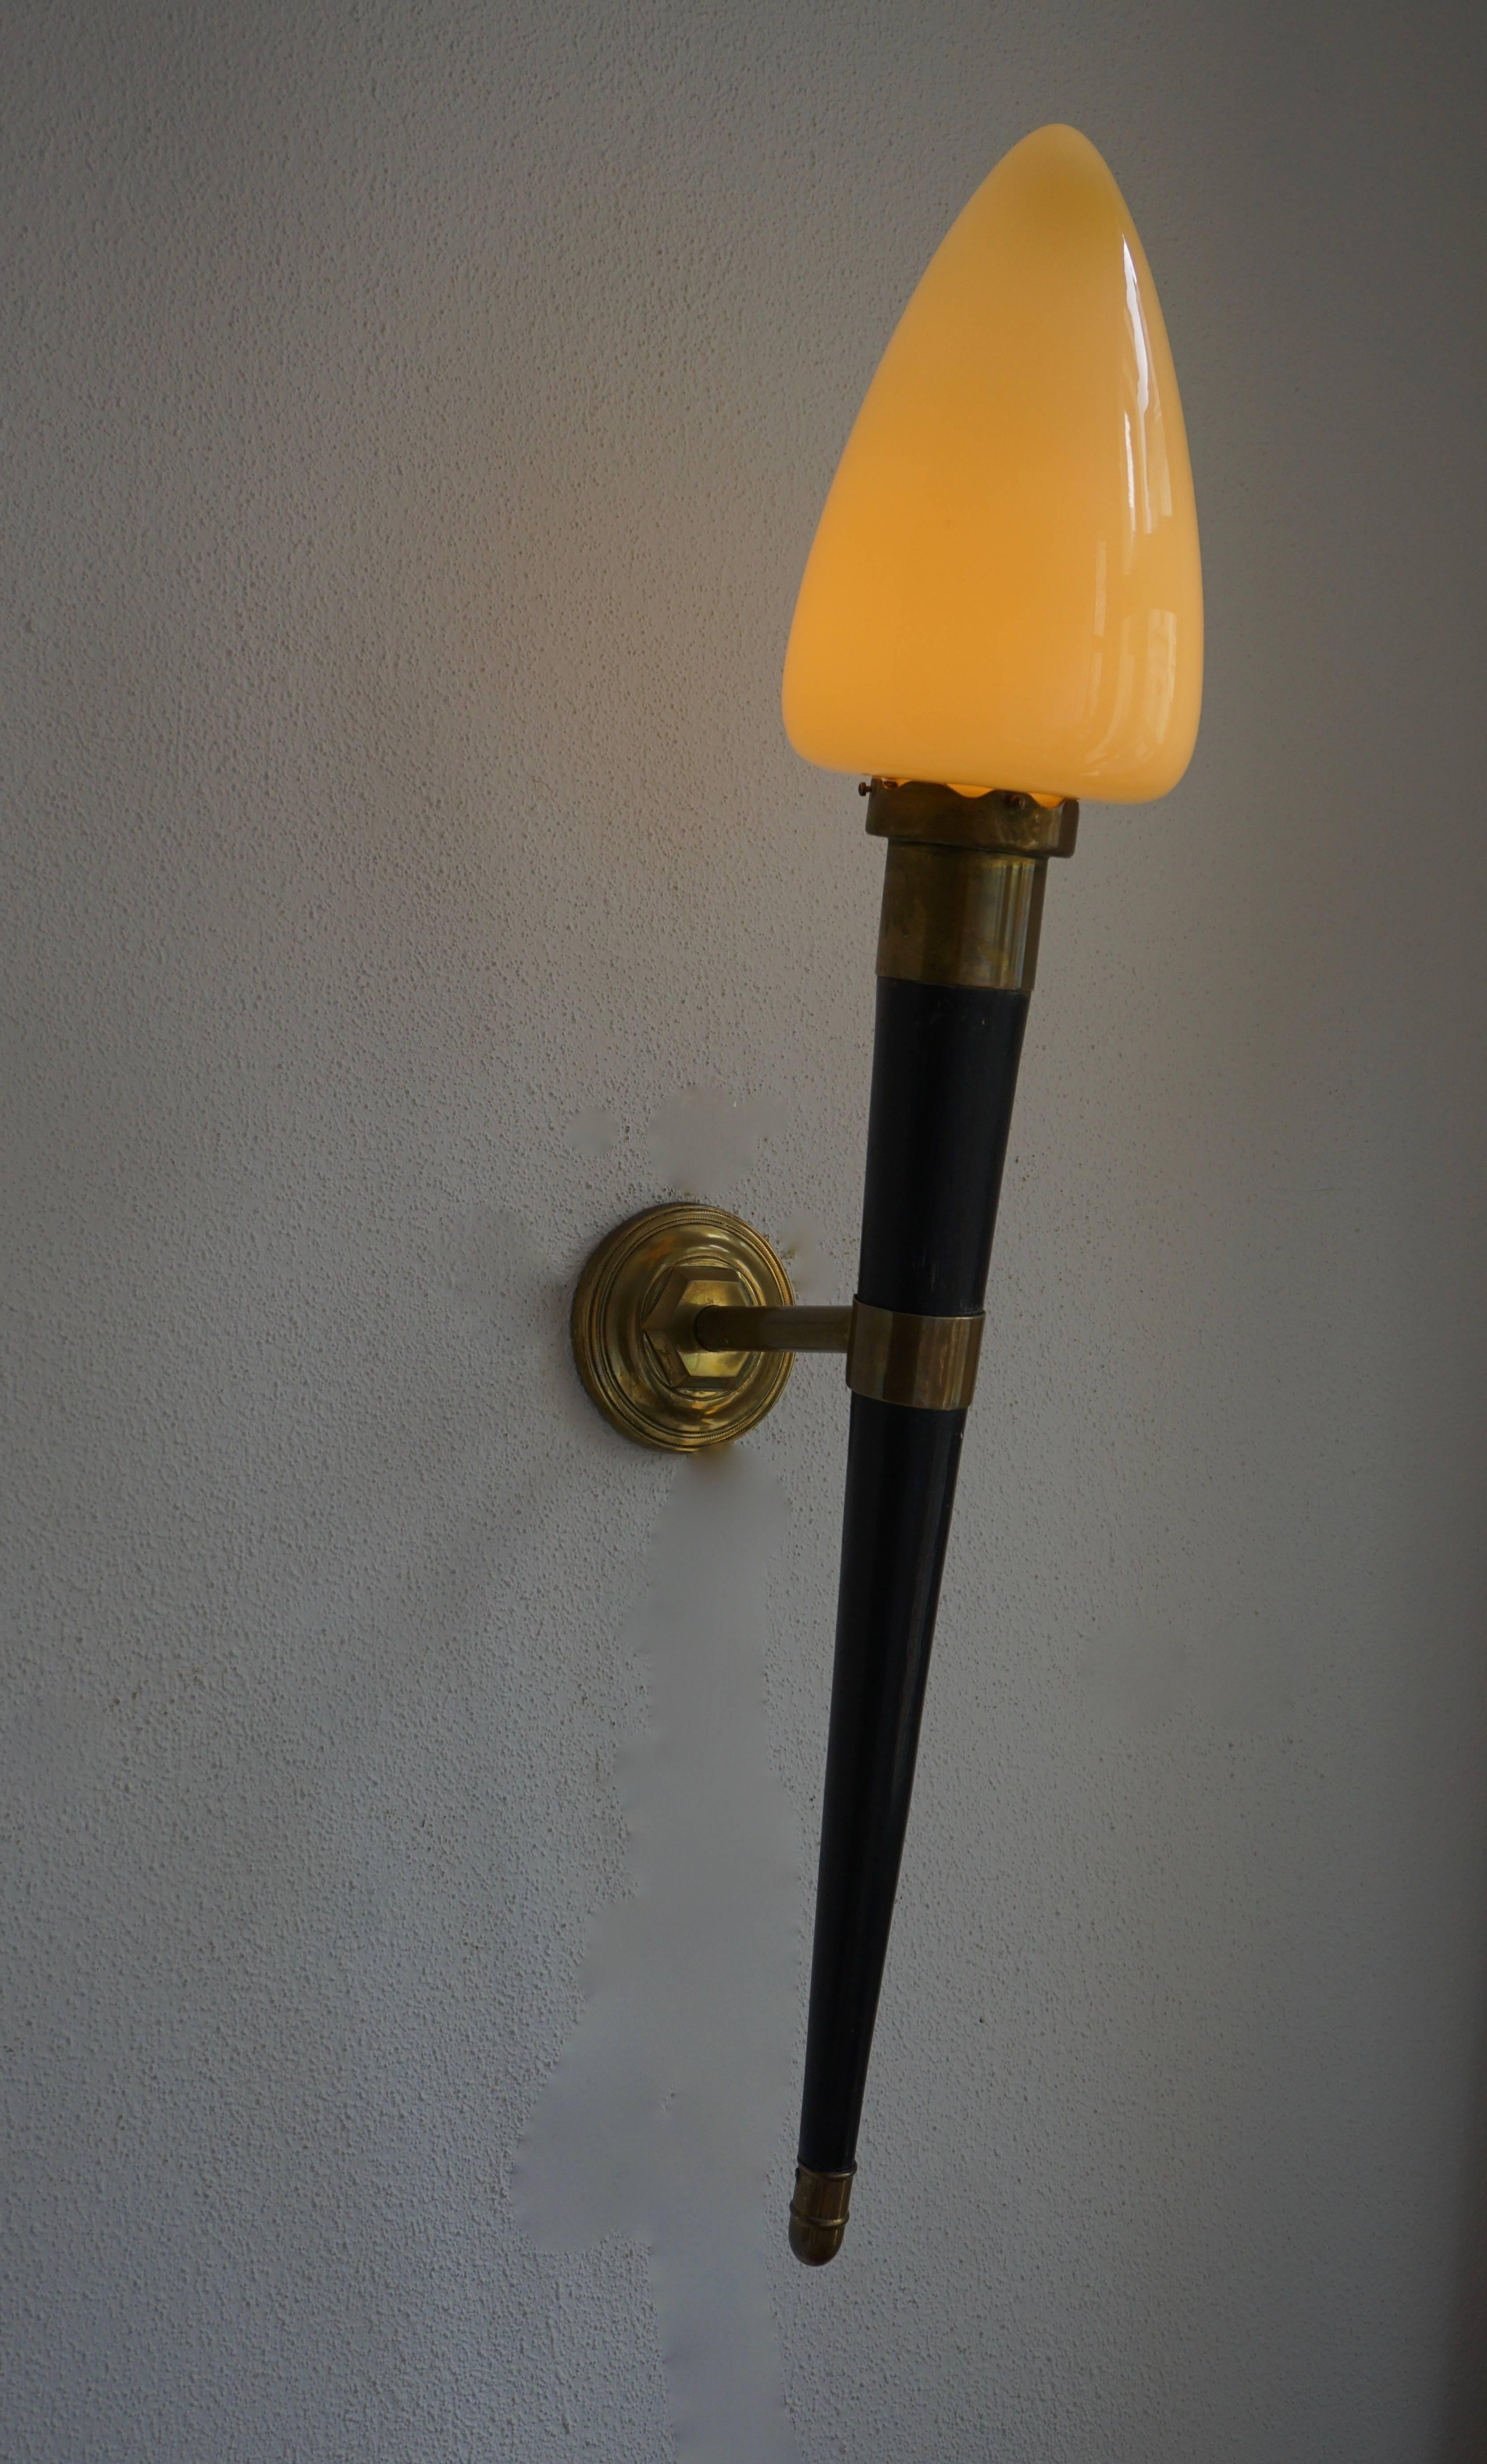 For your consideration a pair of vintage wall sconces. Solid brass, wood and glass. Made in Italy.

Sculptural shape. Requires one bulb per sconces. E-27, 25 to 40 watts. 

Measures: Height 90 cm.
Diameter 17 cm.
Depth 36 cm.
    